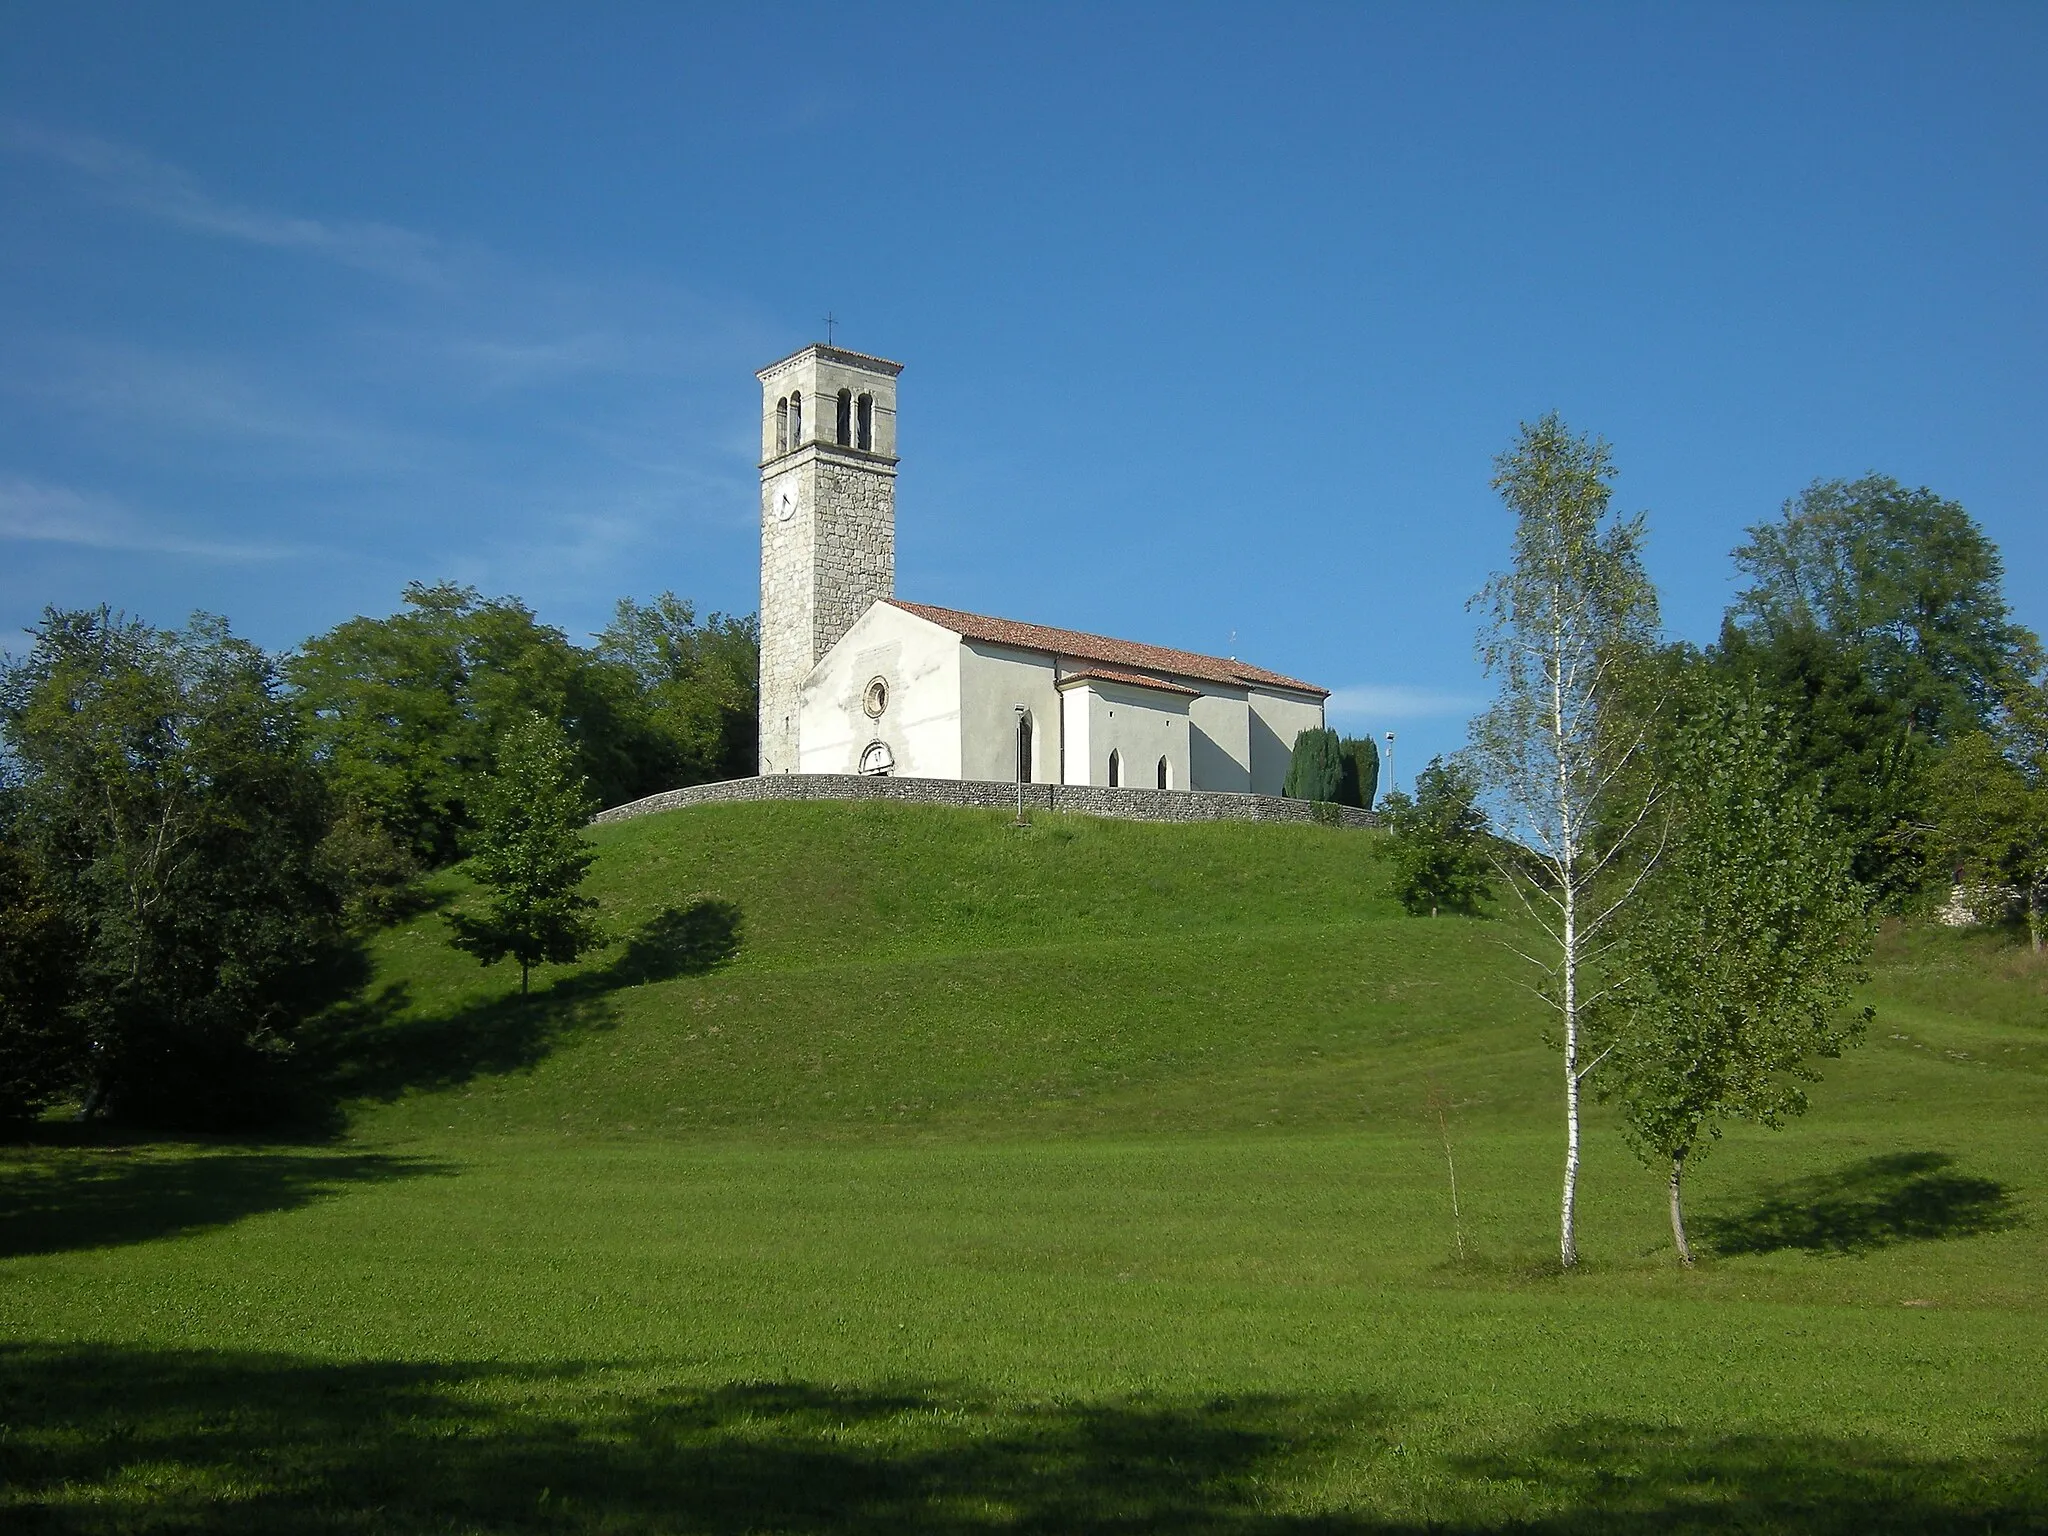 Photo showing: The church of S. Stefano in Valeriano